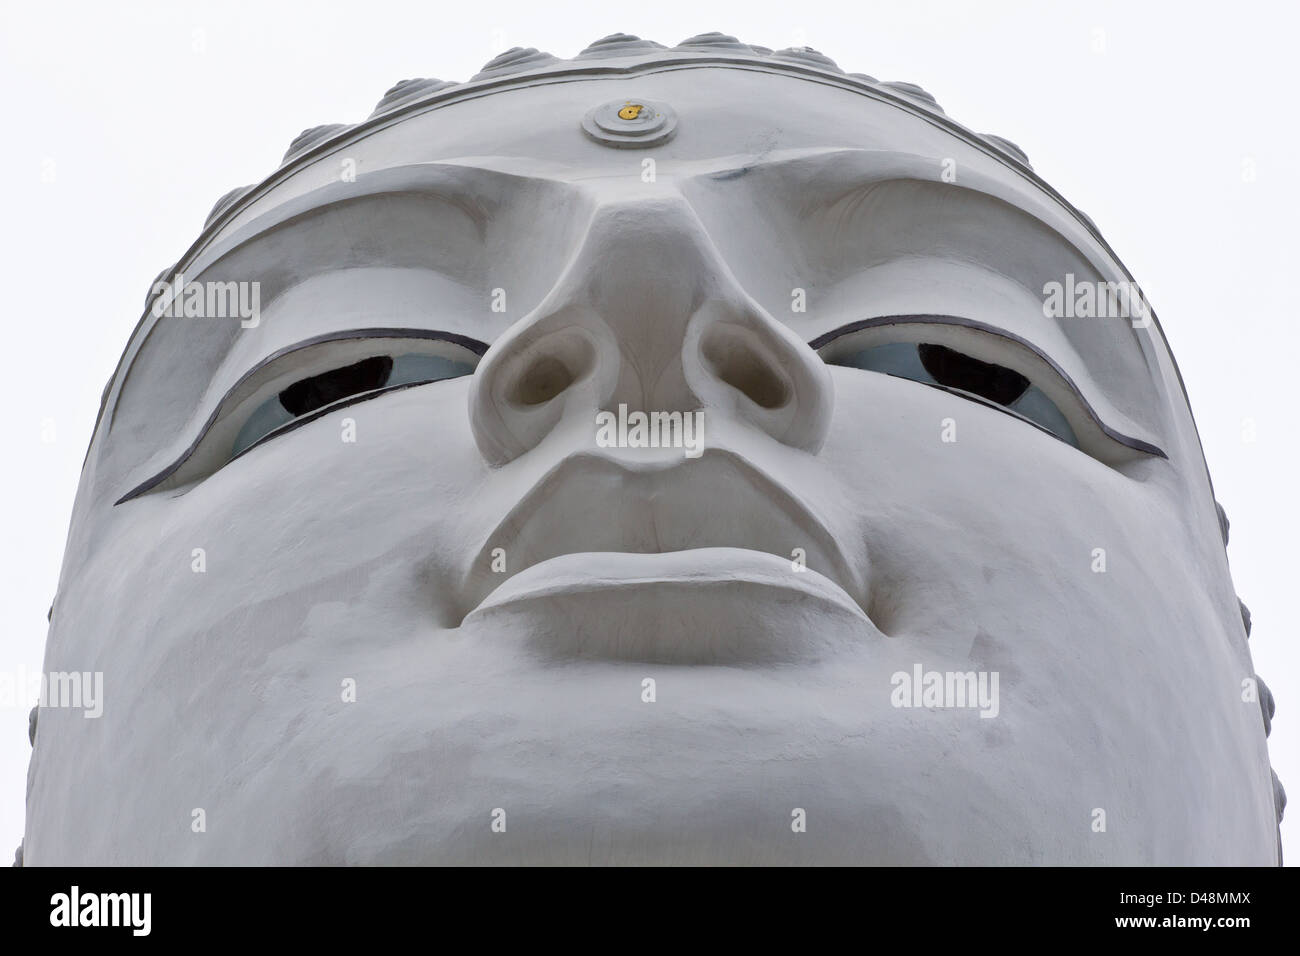 THE FACE OF A LARGE WHITE BUDDHA STATUE ON A HILL WHICH OVERLOOKS KANDY IN SRI LANKA Stock Photo